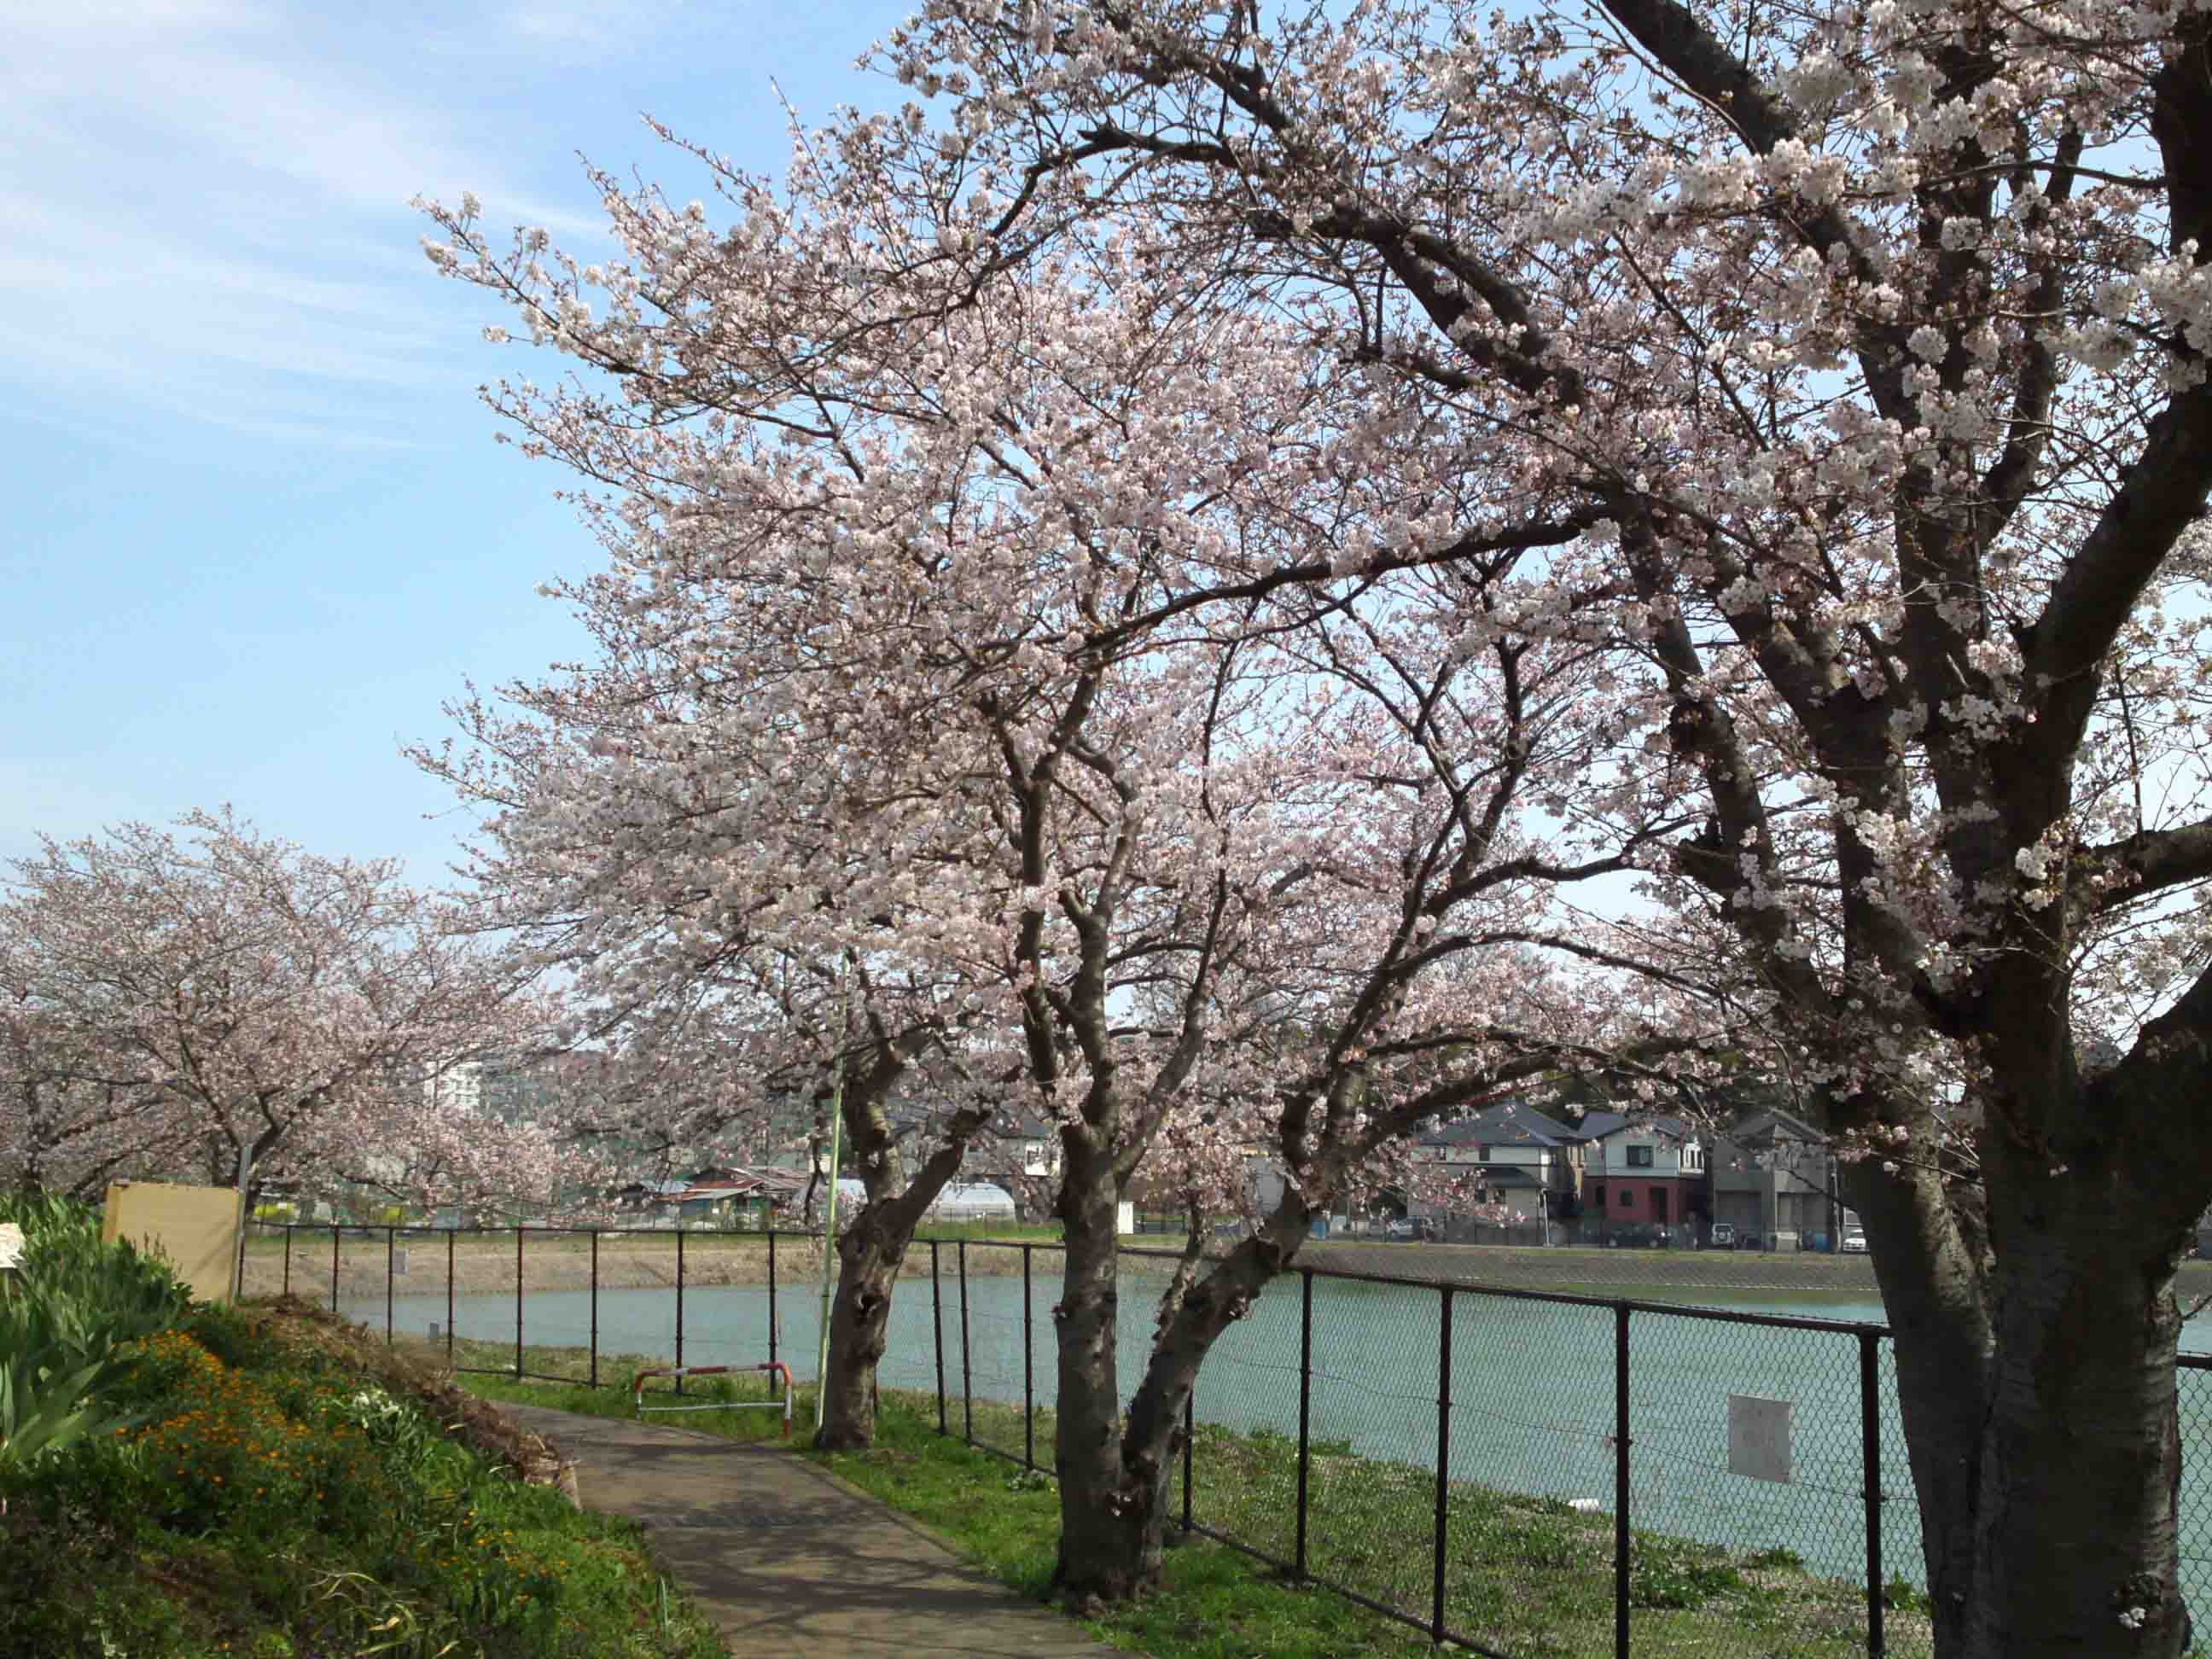 cherry trees lining along the pond